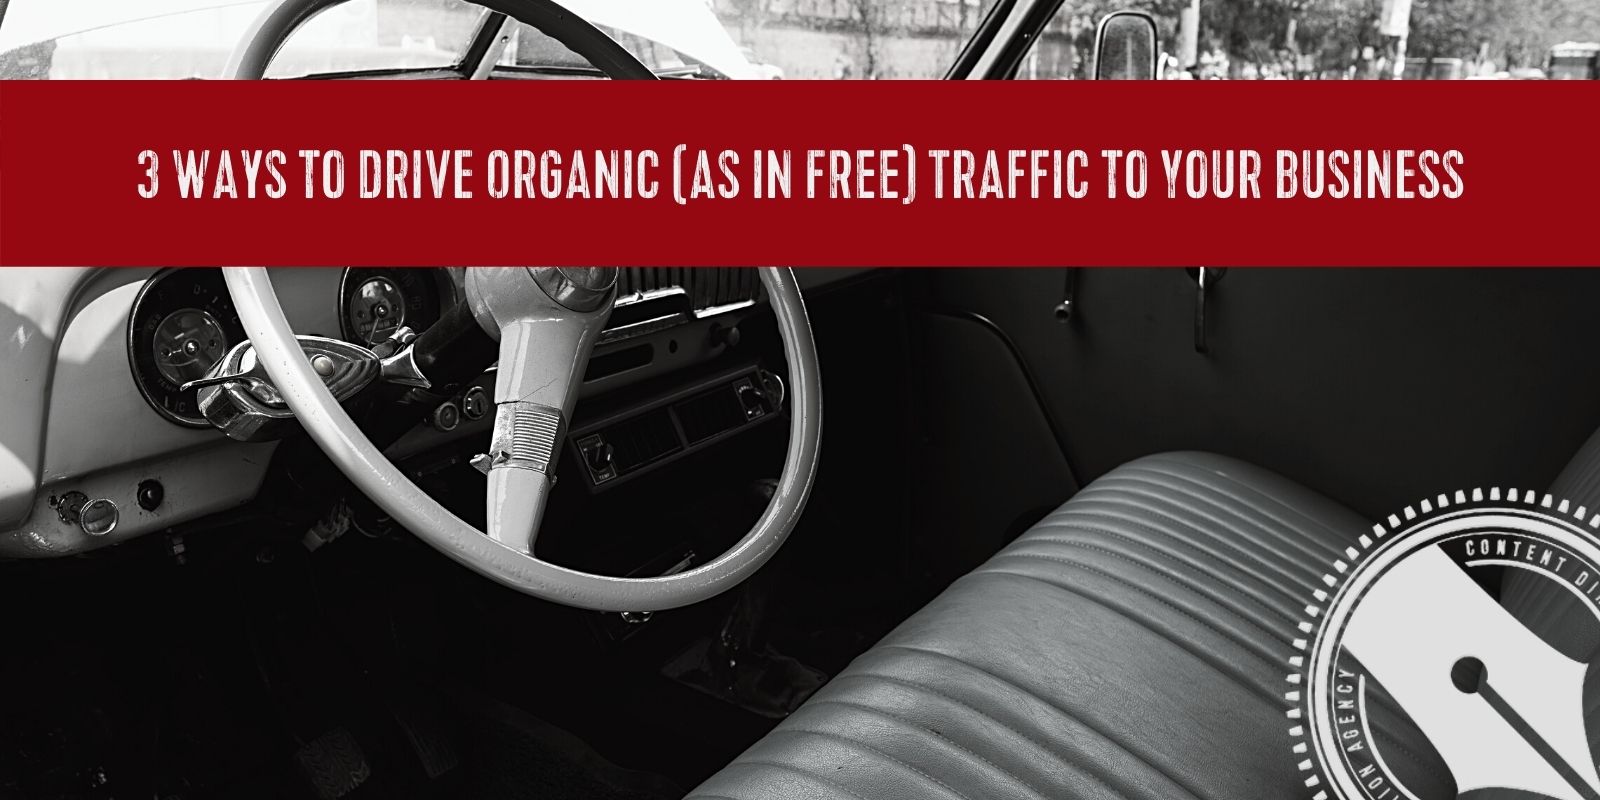 [A red banner spans across the top of a black and white image of the interior of a vintage car with a bench seat. The banner says, "3 Ways to Drive Organic (as in FREE) Traffic to Your Business". The Content Direction Agency logo is in the bottom right corner of the image,]